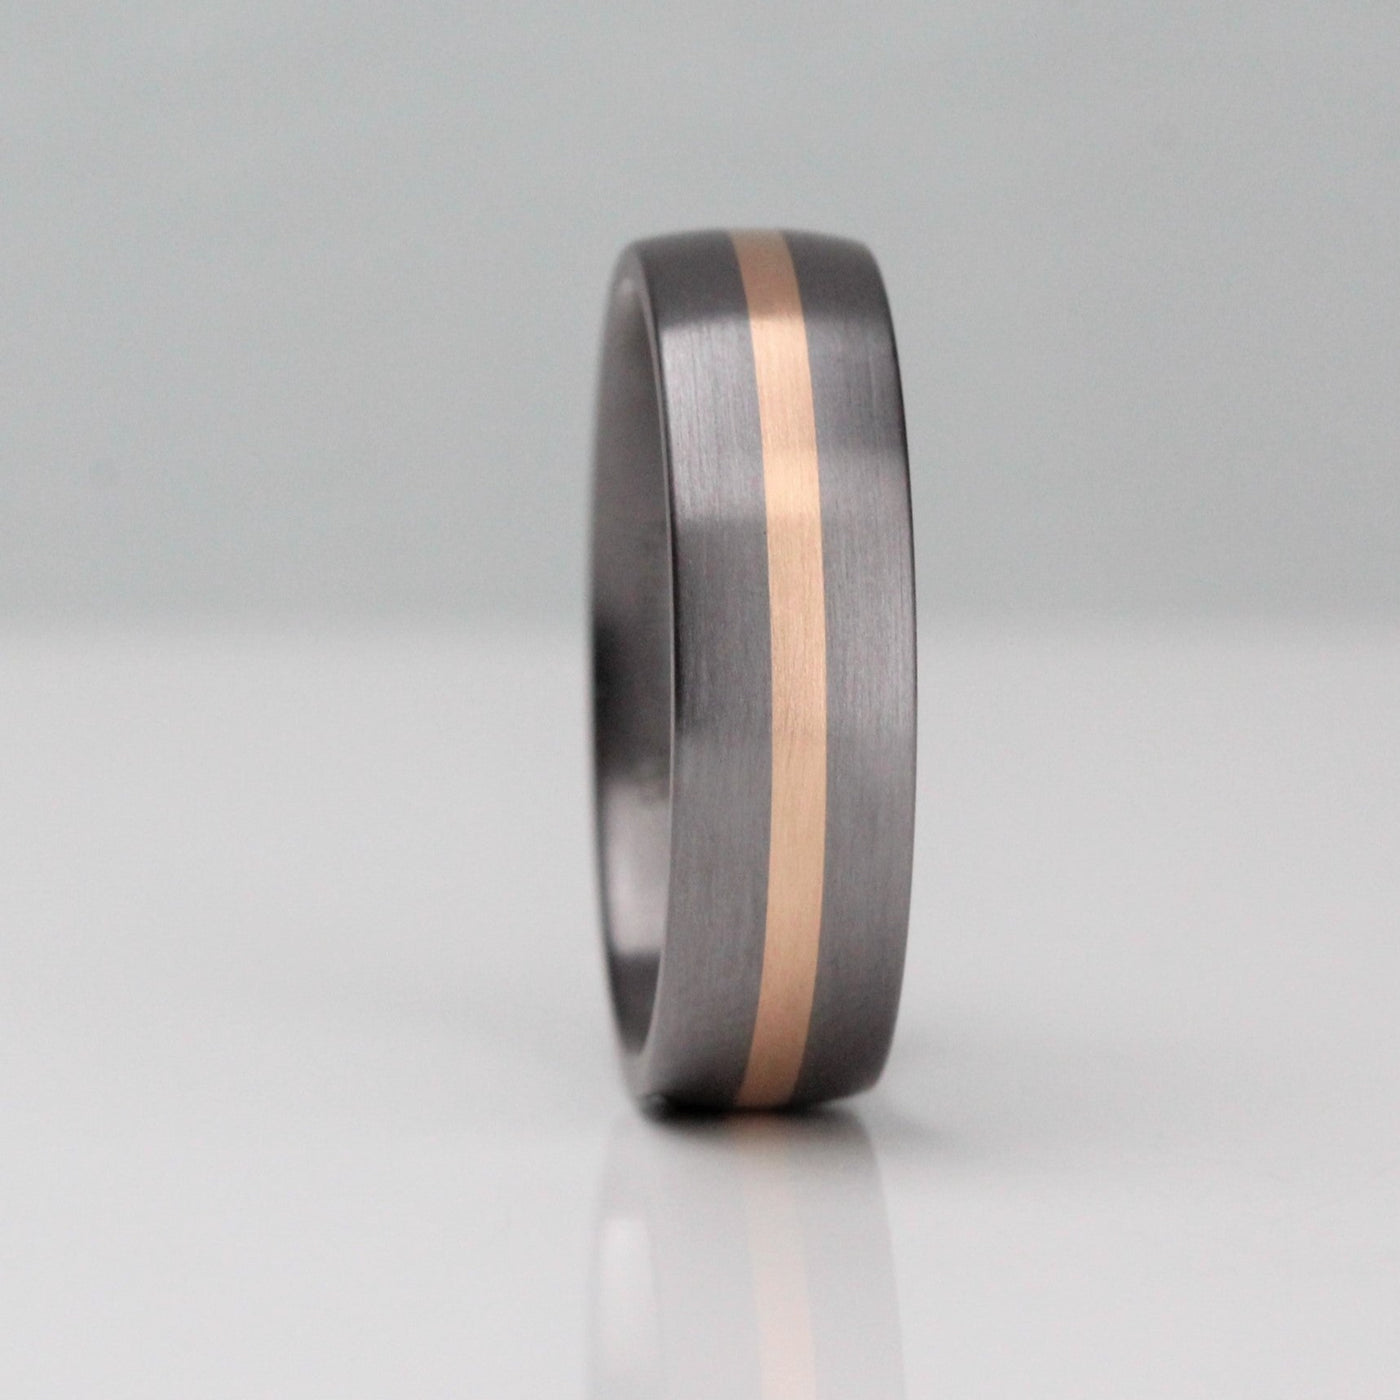 6mm wide tantalum wedding ring. With a 2mm cenrral stripe of rose gold. Tantalum has a gunmetal colour. court shape